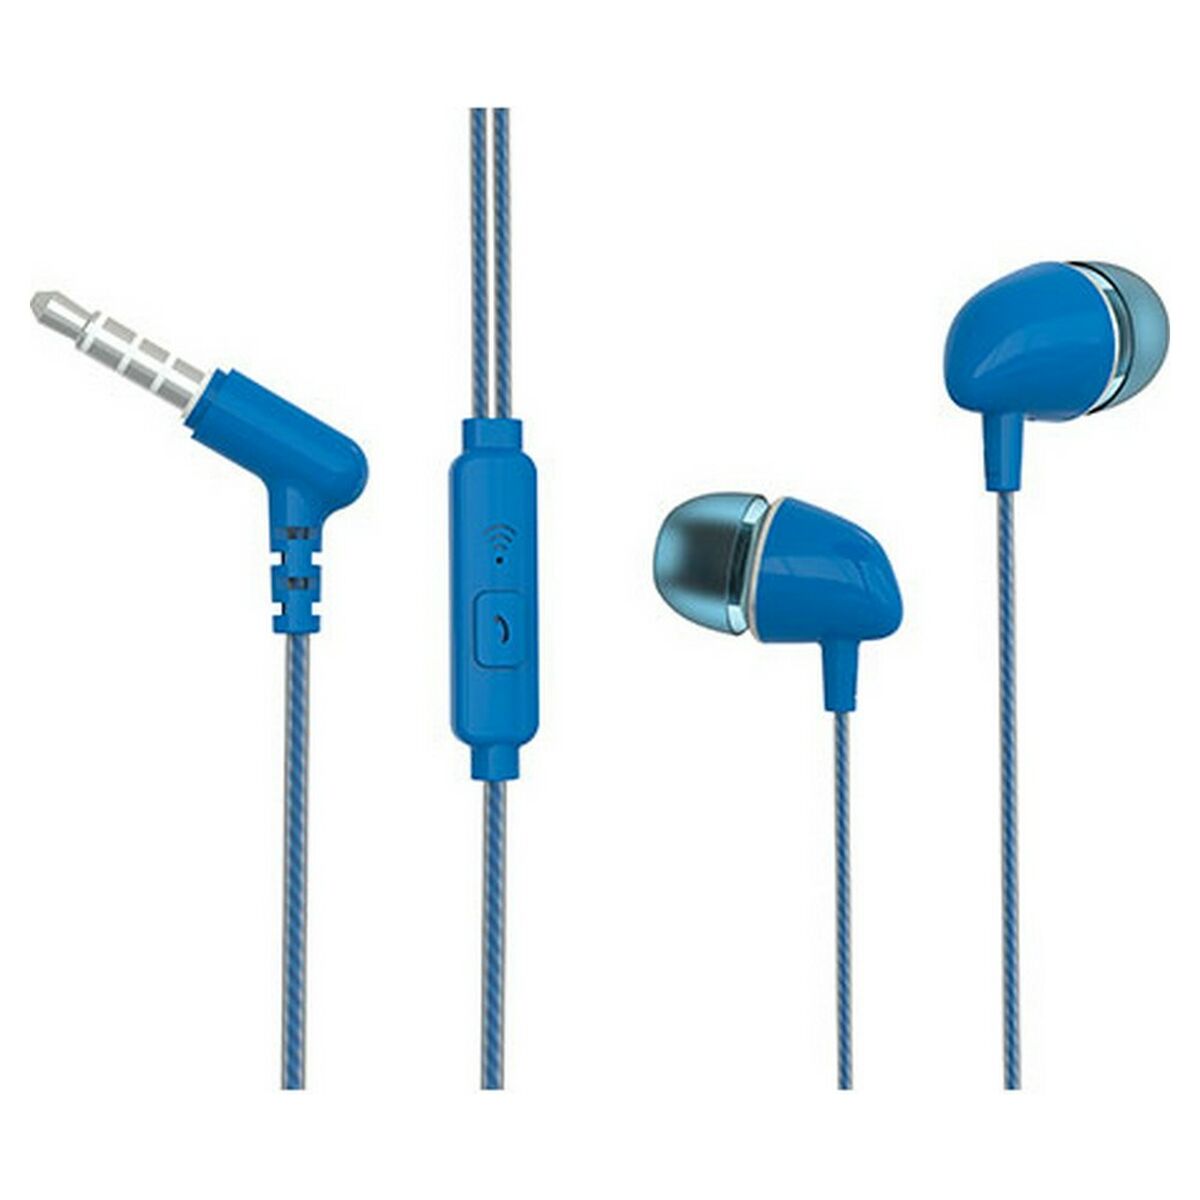 Headphones with Microphone TM Electron Blue, TM Electron, Electronics, Mobile communication and accessories, headphones-with-microphone-tm-electron-blue, Brand_TM Electron, category-reference-2609, category-reference-2642, category-reference-2847, category-reference-t-19653, category-reference-t-21312, category-reference-t-4036, category-reference-t-4037, computers / peripherals, Condition_NEW, entertainment, gadget, music, office, Price_20 - 50, telephones & tablets, Teleworking, RiotNook